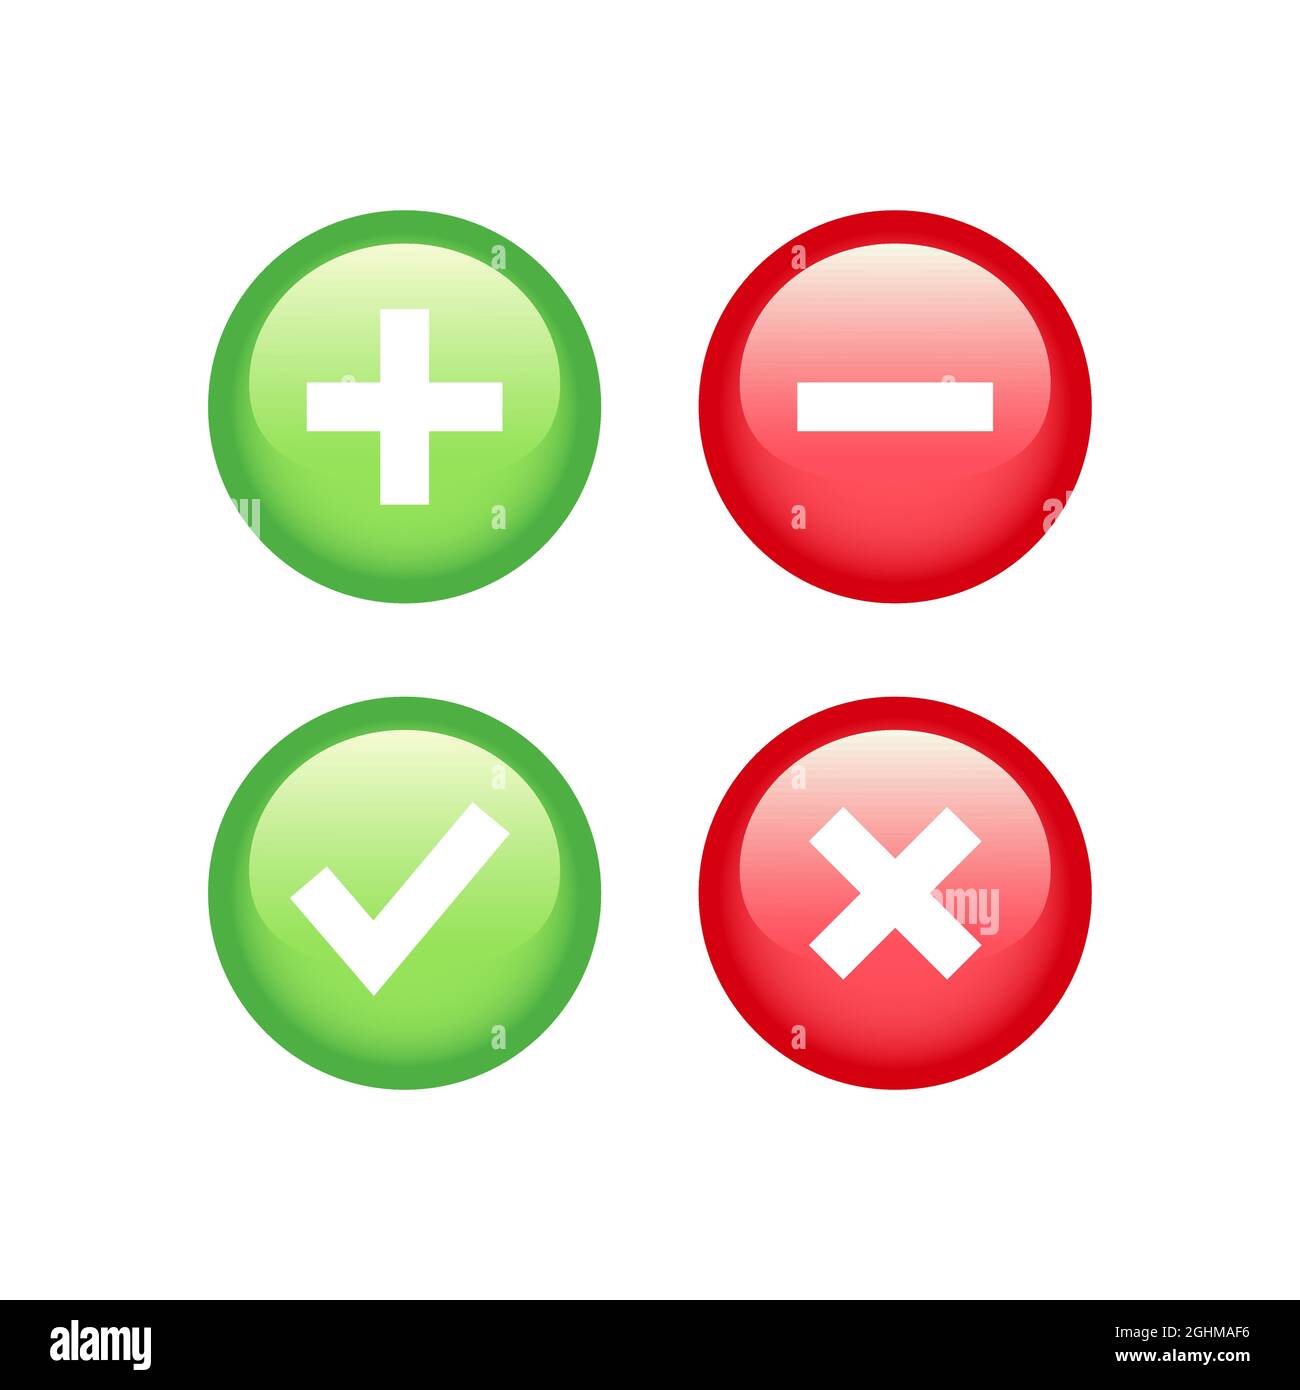 Red Check Mark Or Tick Sign Easily Editable Colorable Eps 8 Vector Icon Isolated On Transparent Background No 4 Variant Stock Vector Image Art Alamy